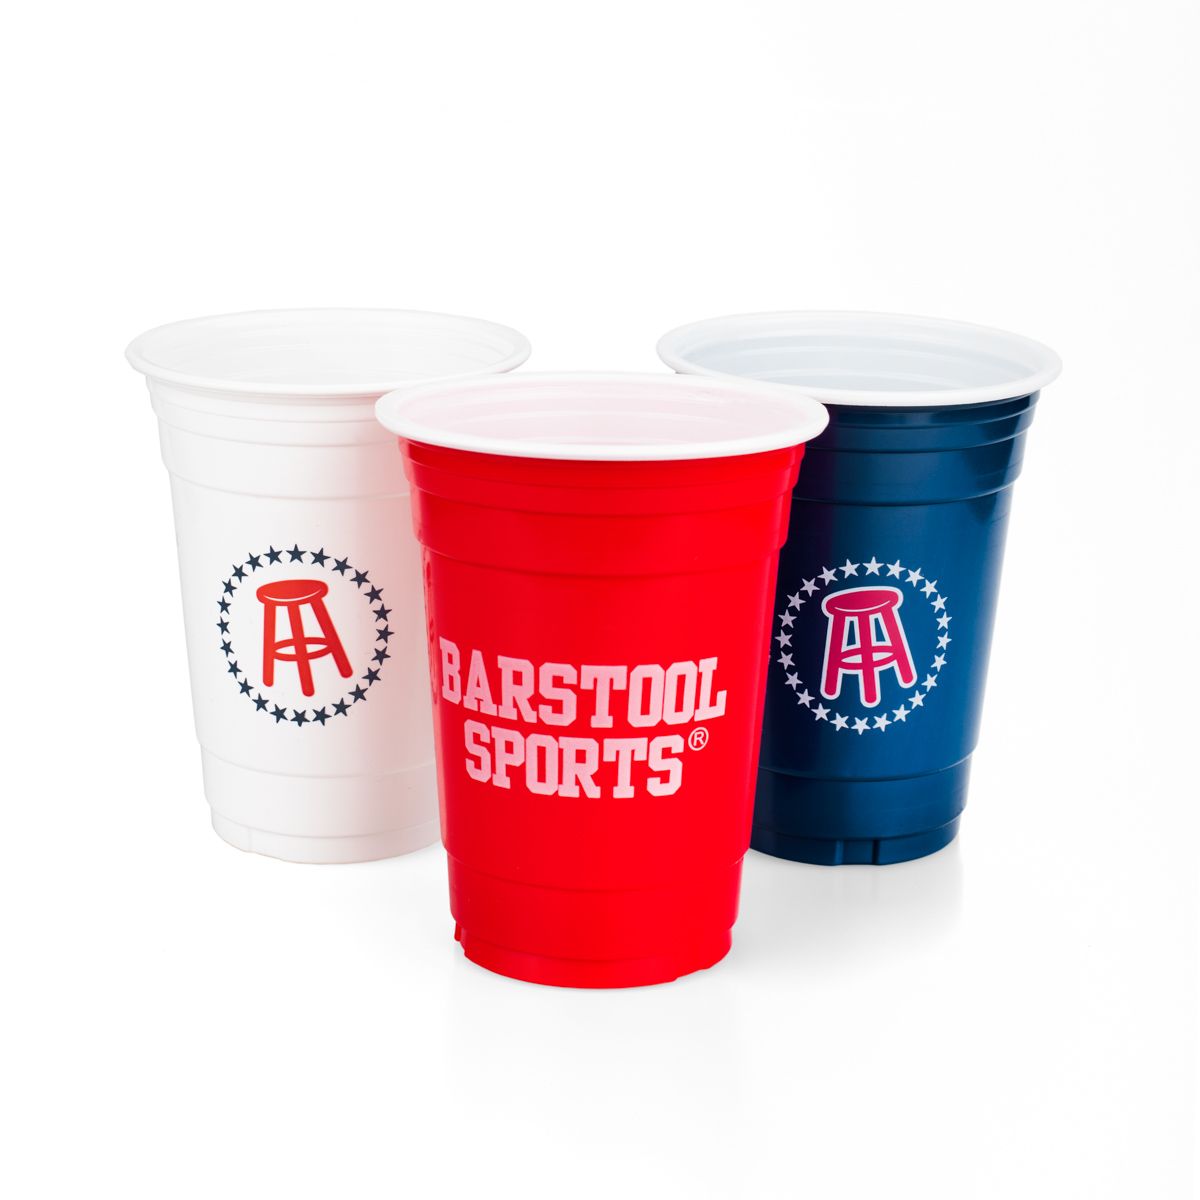 Barstool Sports Logo Party Cups - 14 Pack-Drinkware-Barstool Sports-Barstool Sports